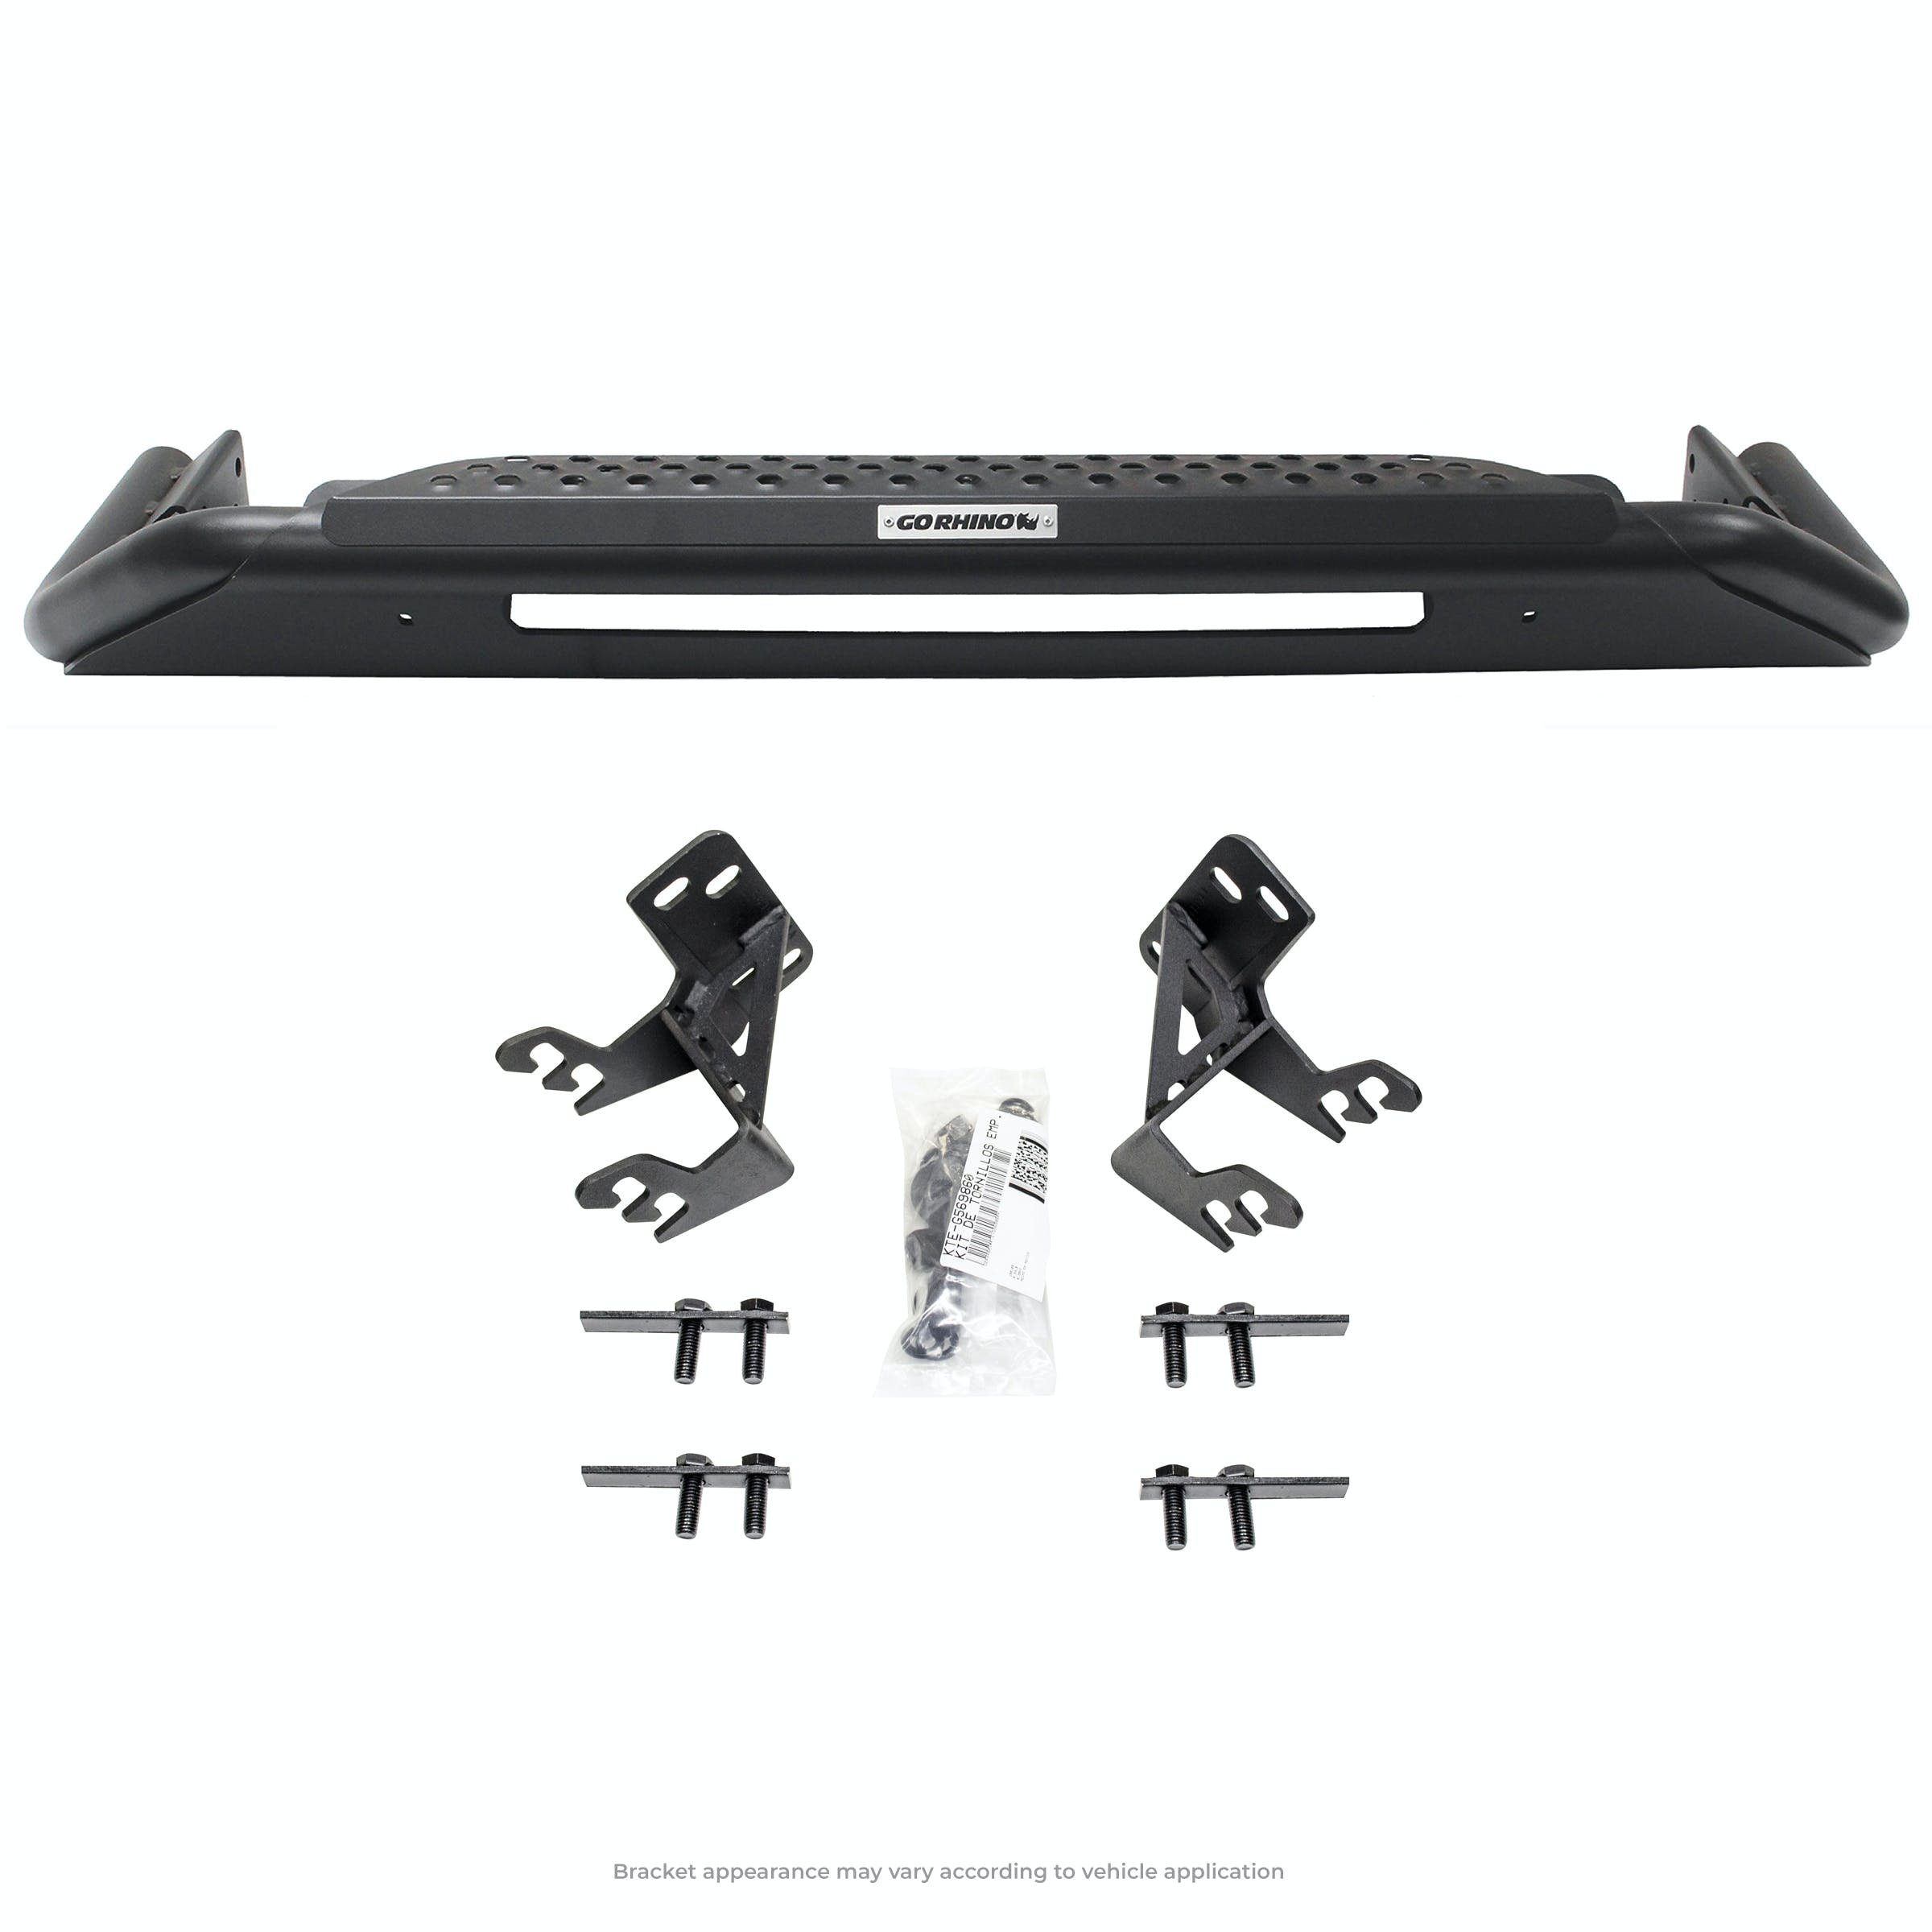 Go Rhino 568960T RC3 LR - Complete kit: Front guard + Brackets